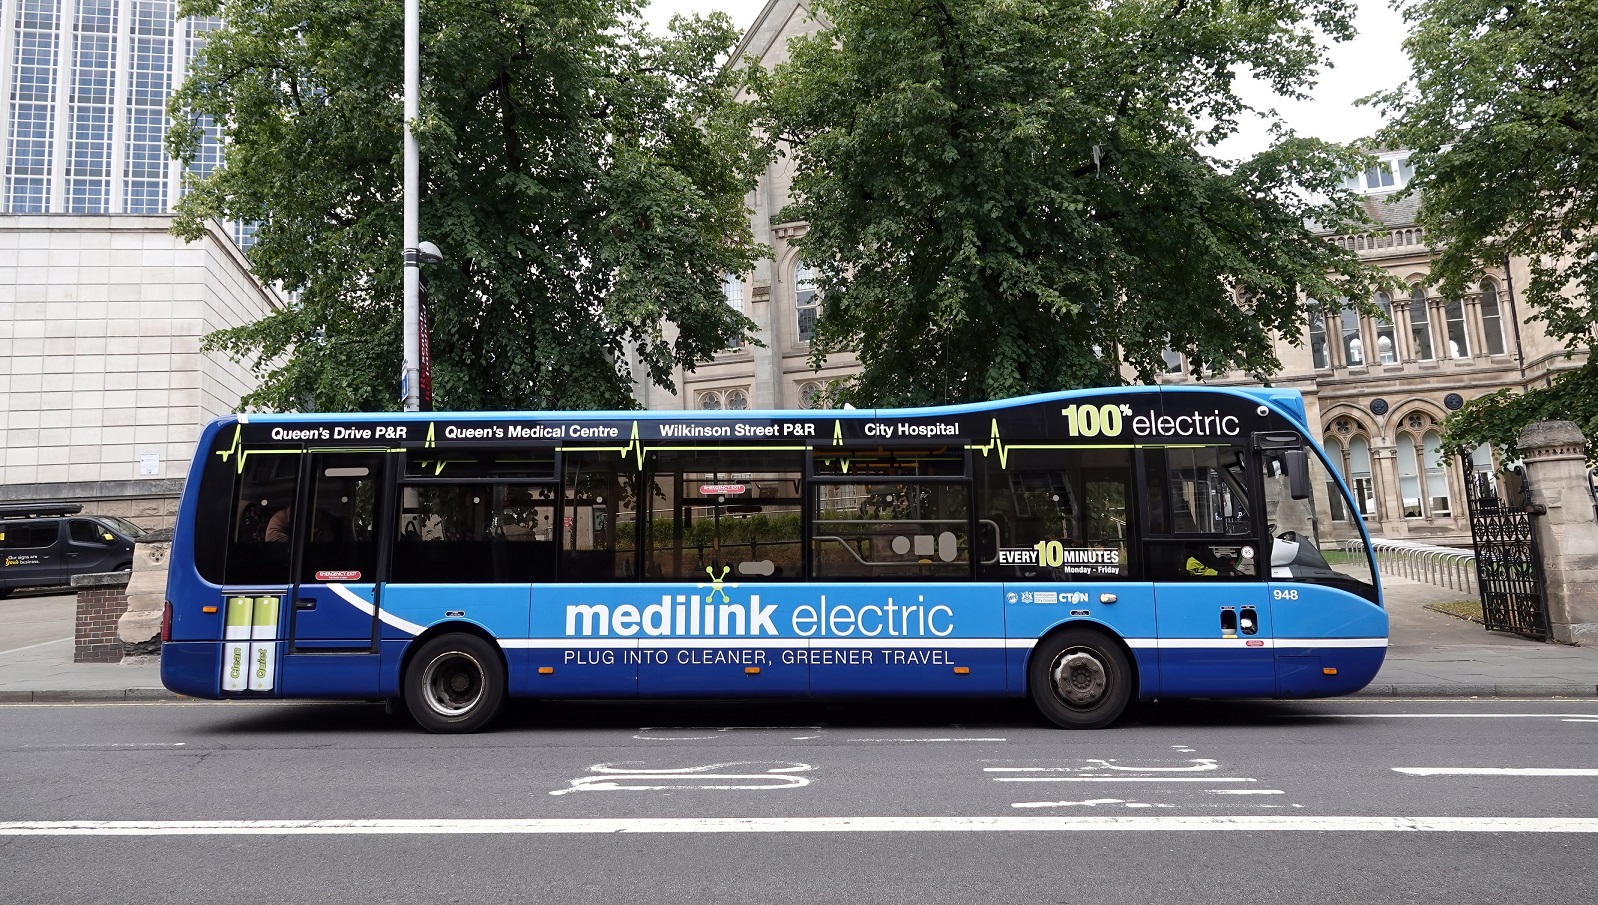 Further key news in zero emission bus developments expected in 2023